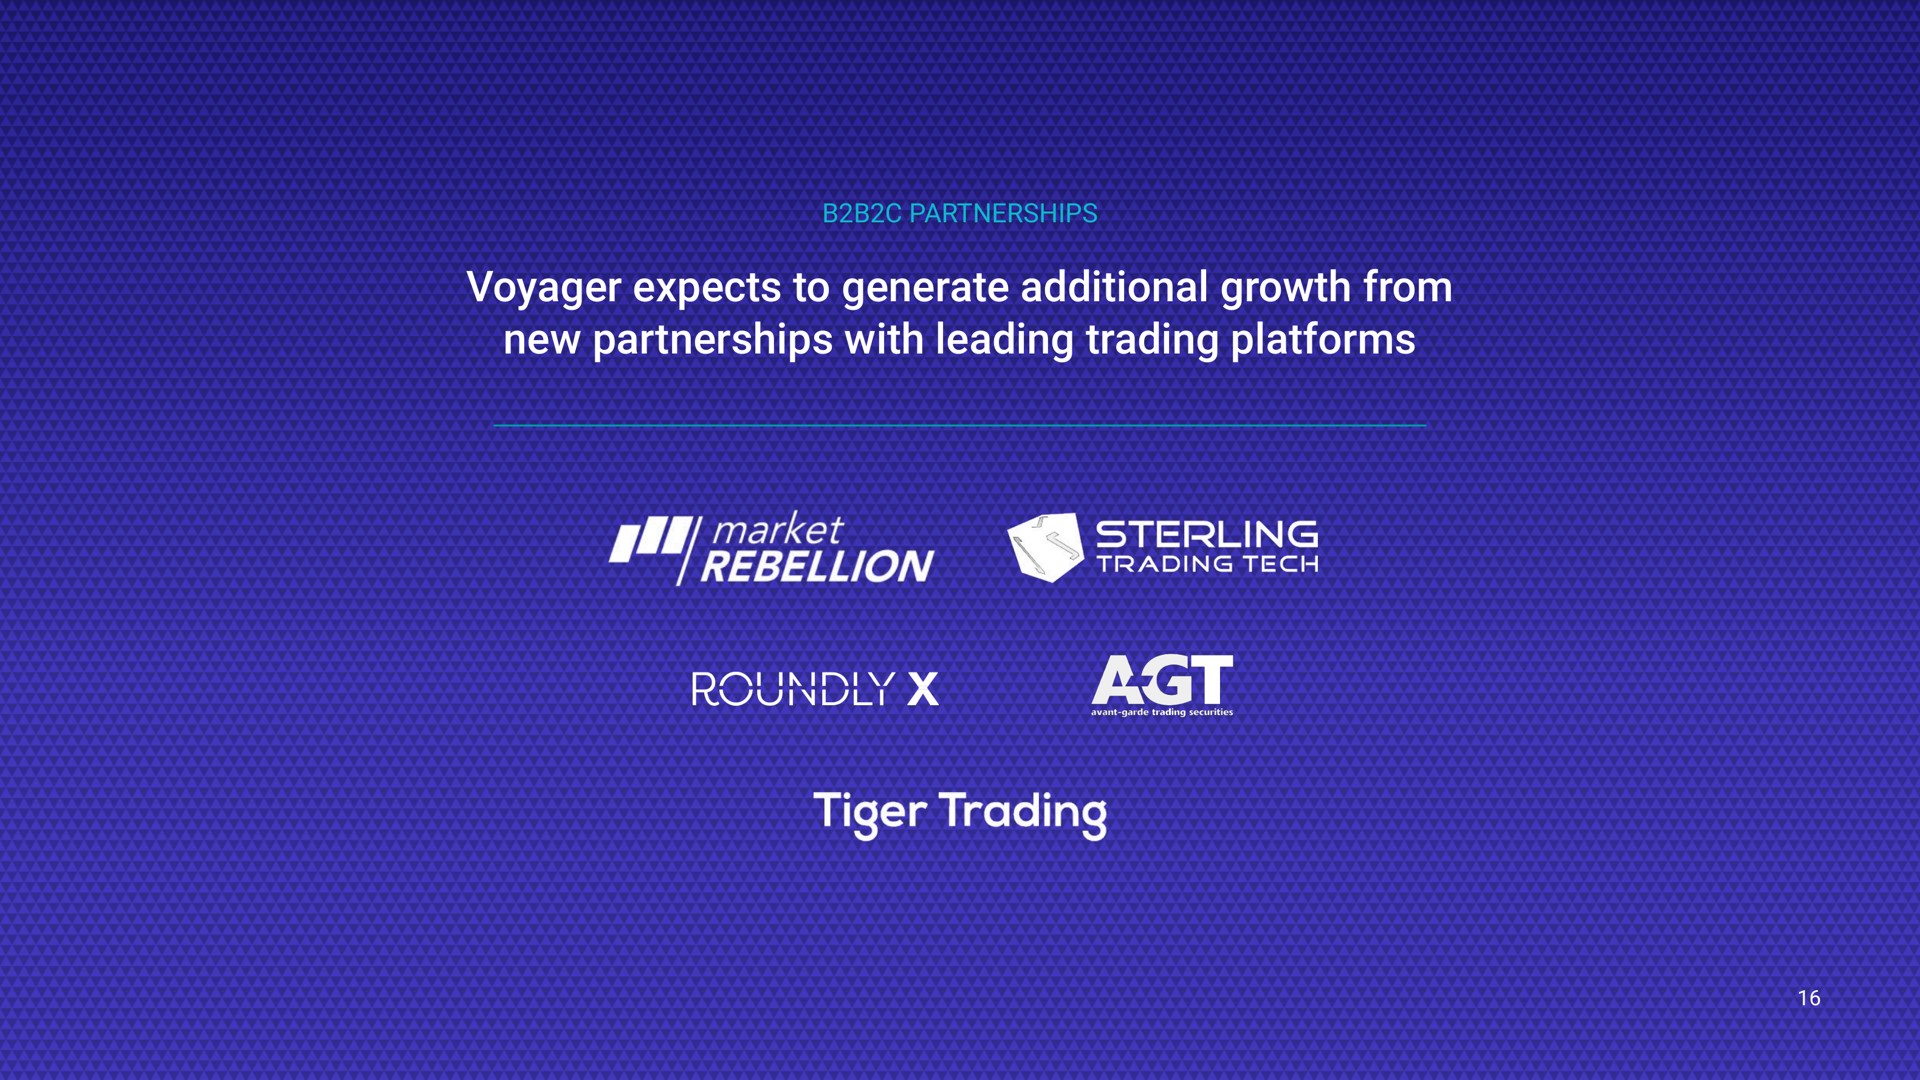 partnerships voyager expects to generate additional growth from new partnerships with leading trading platforms roundly tiger | Voyager Digital